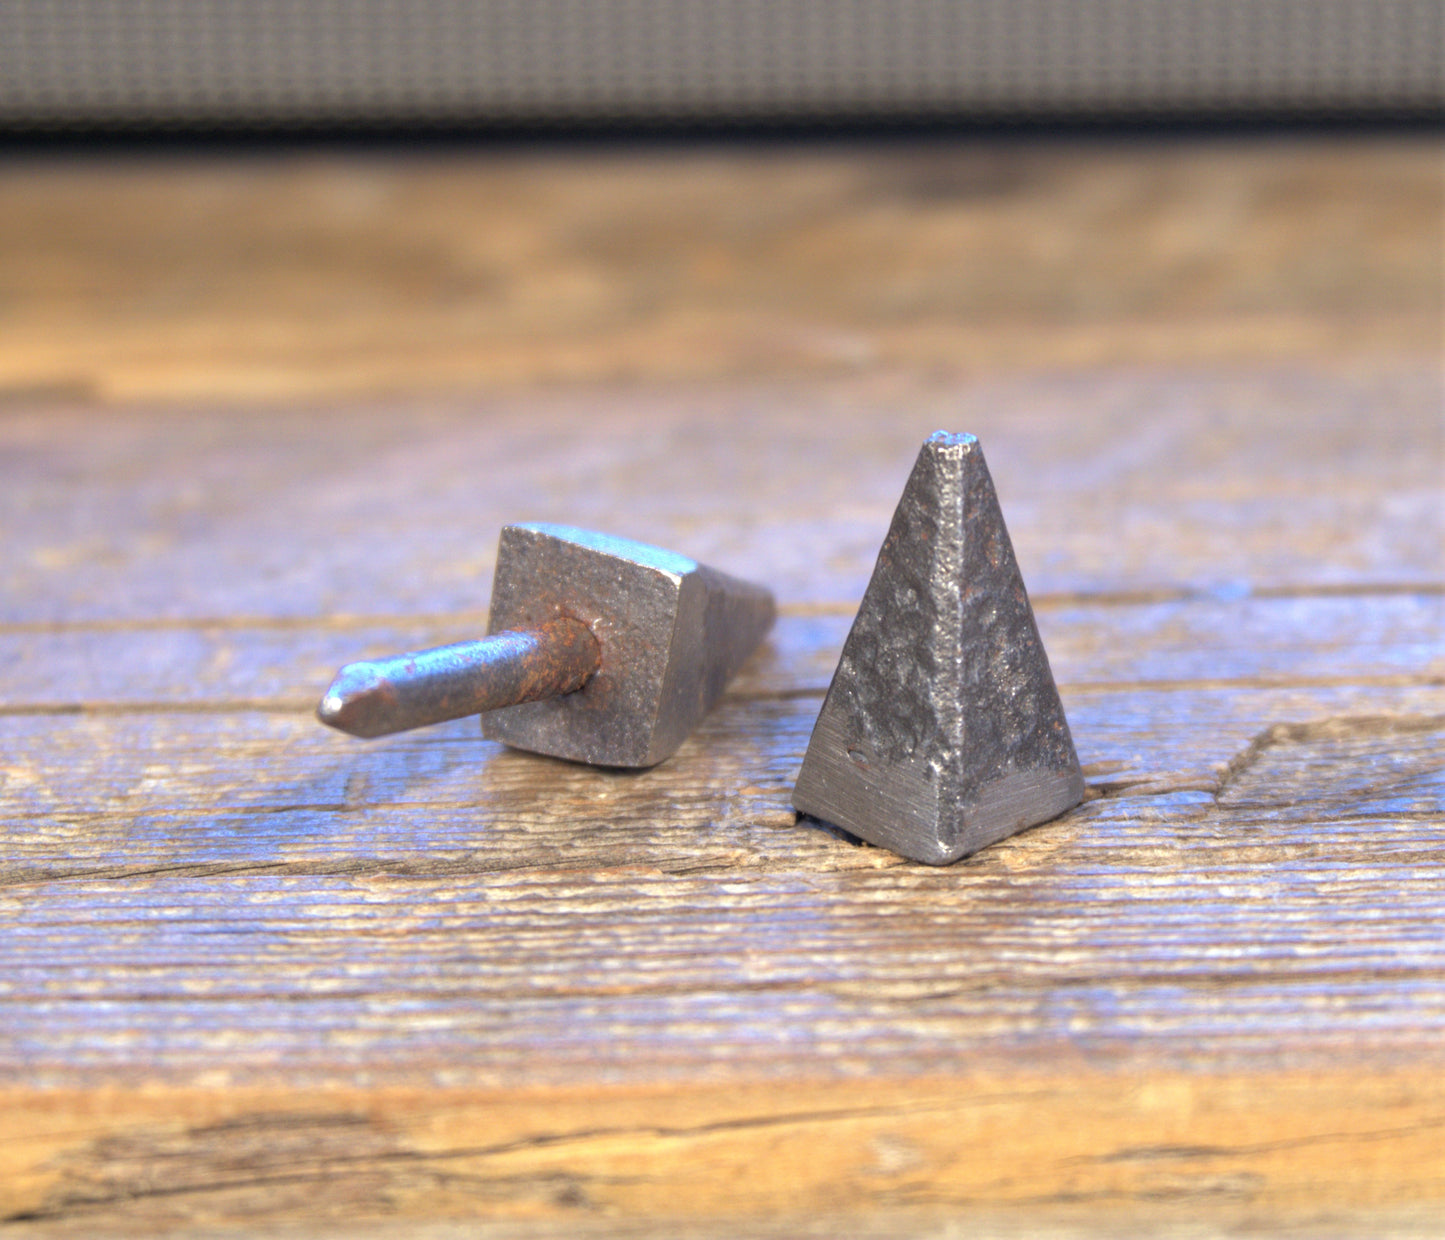 Square Pyramid Castle Spike Nail